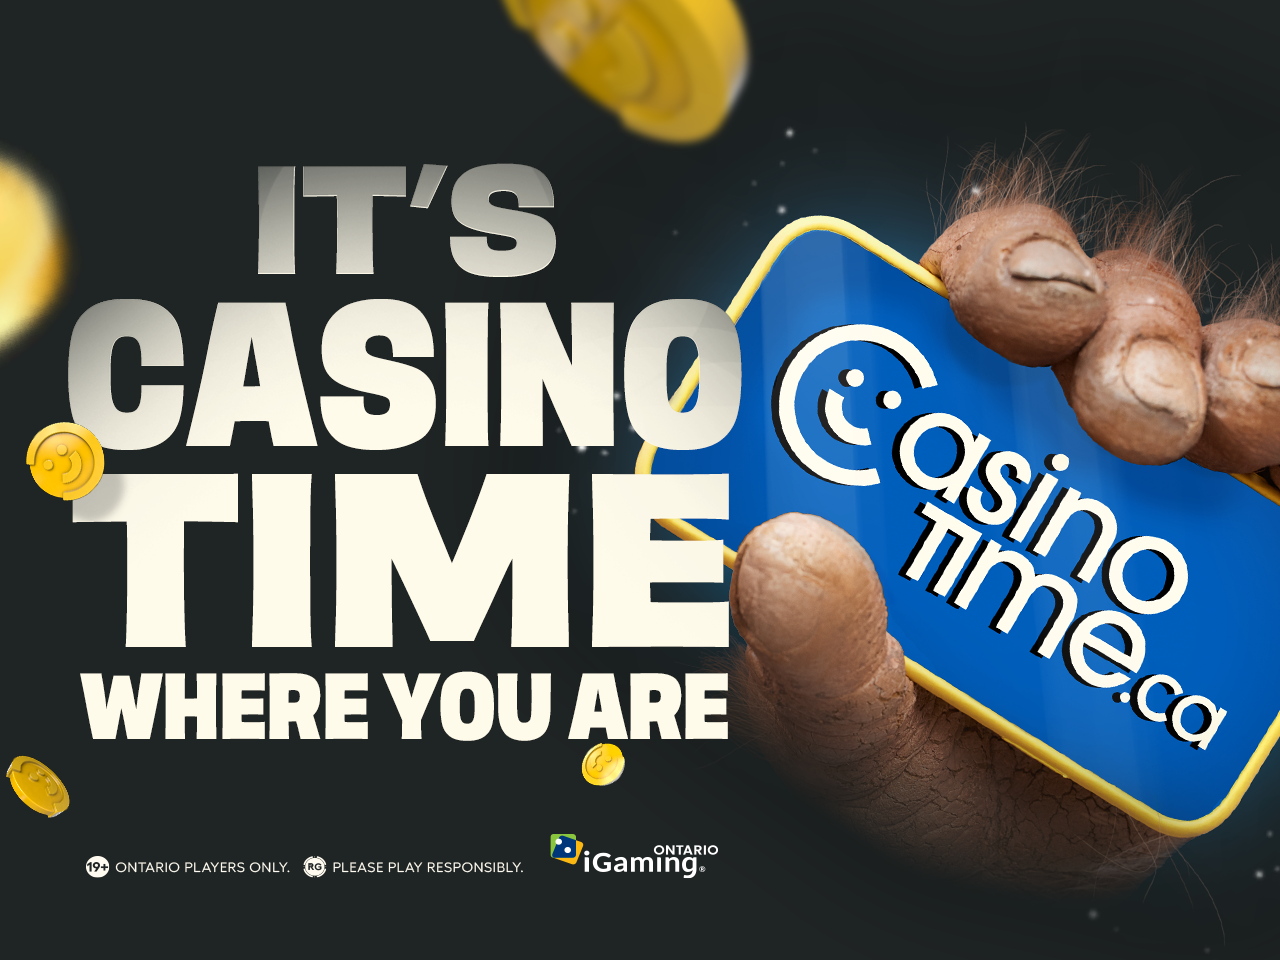 Its Casino Time